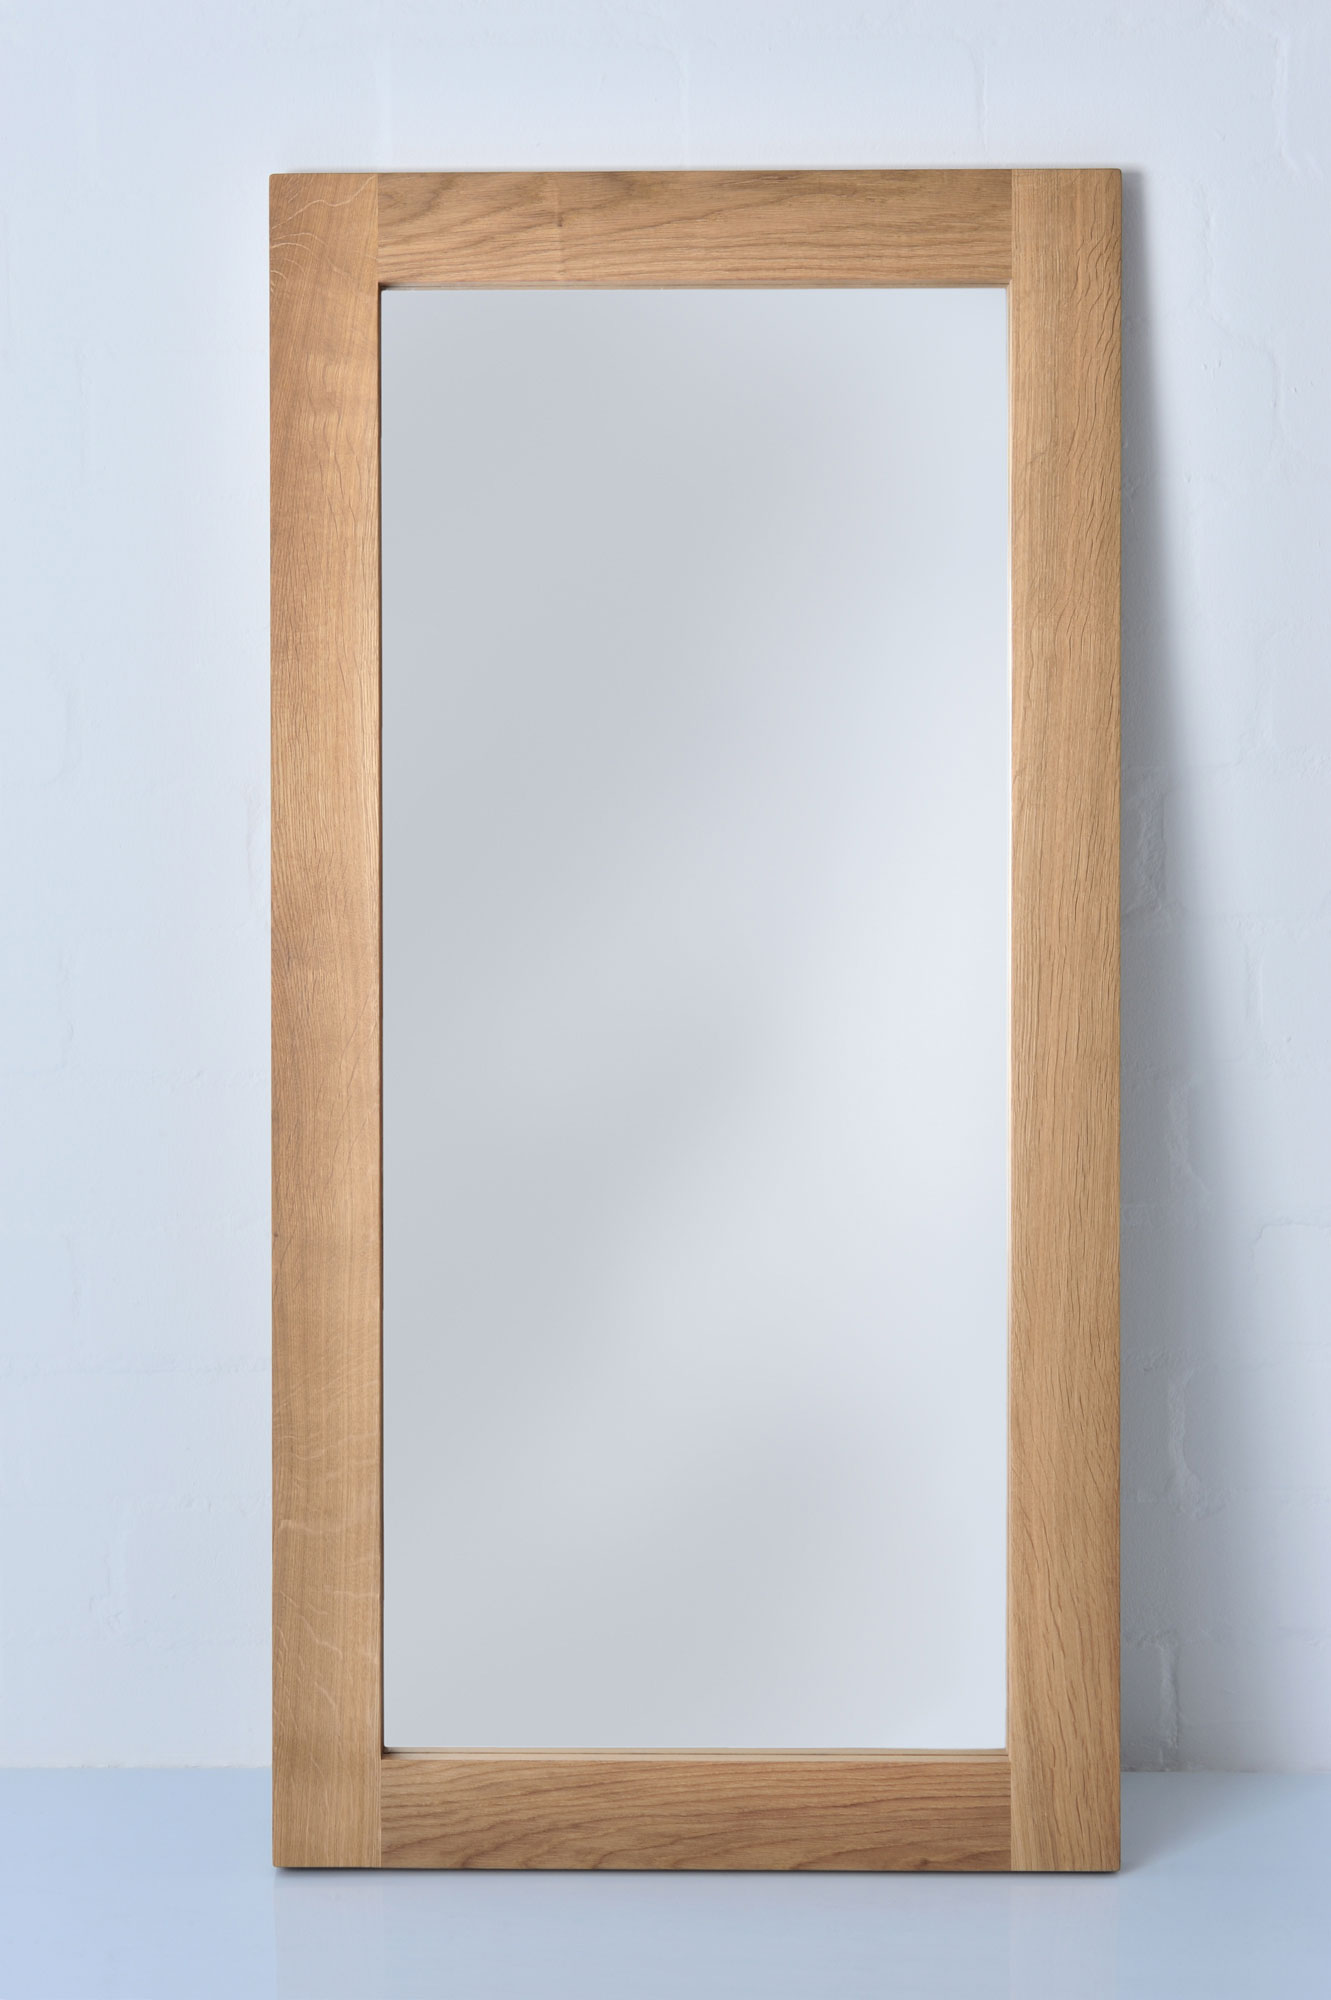 Solid Wood Mirror Accessory MIRROR nef0503 custom made in solid wood by vitamin design